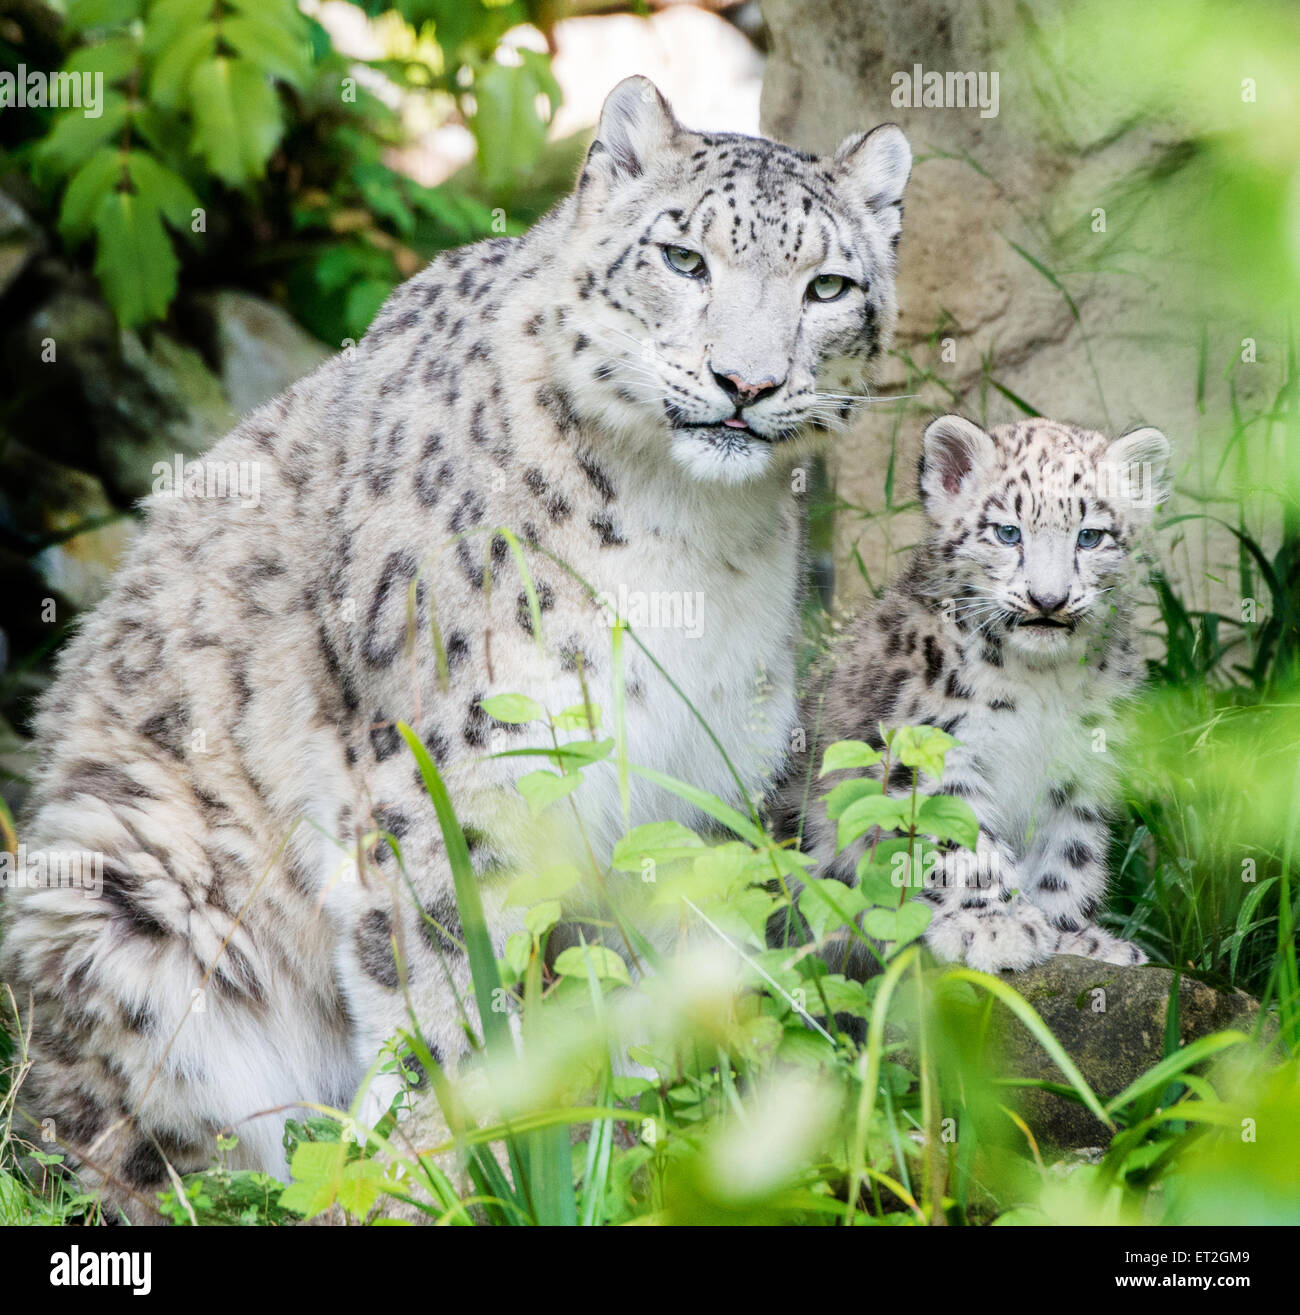 Snow leopard mother and cub Stock Photo